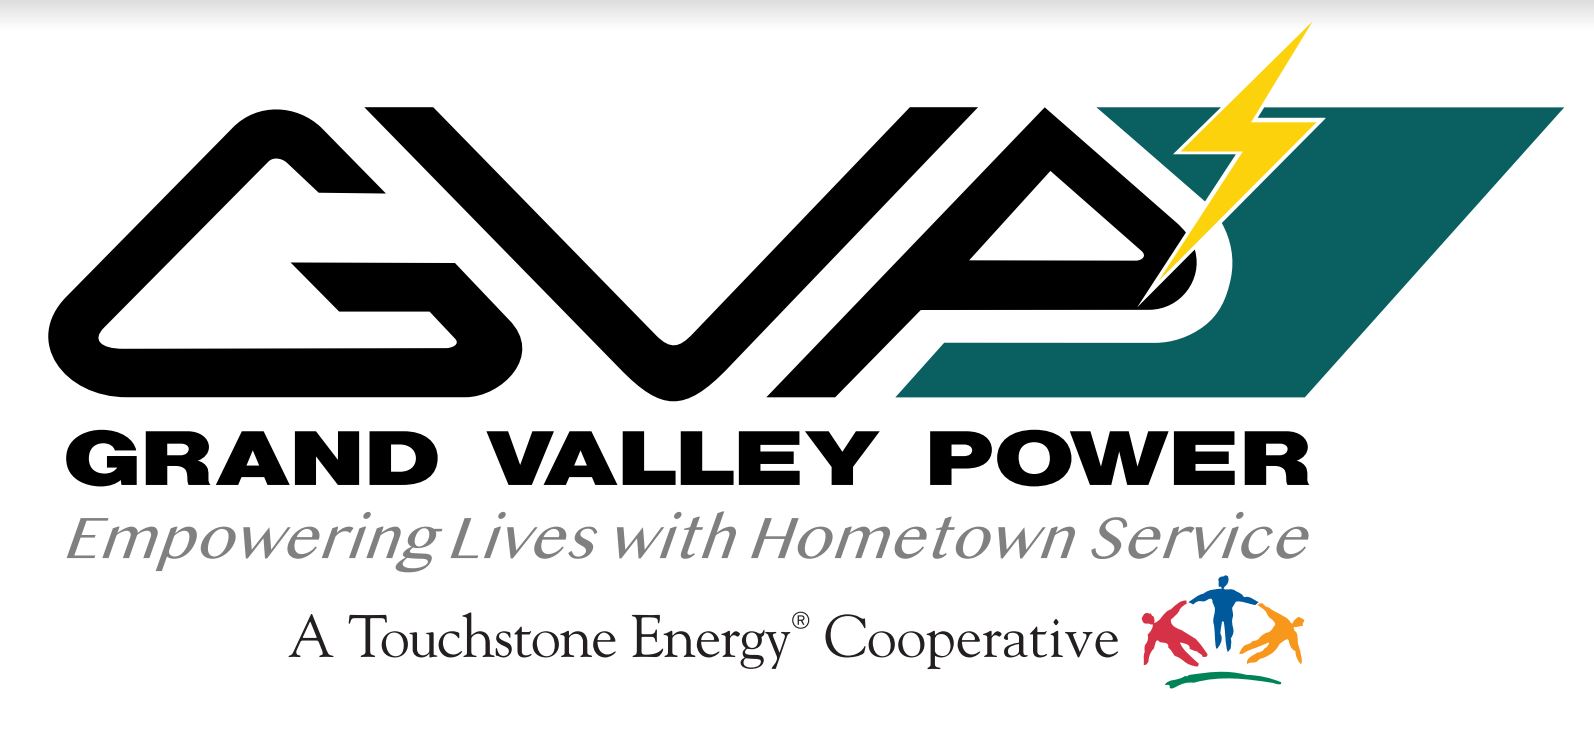 Grand Valley Power